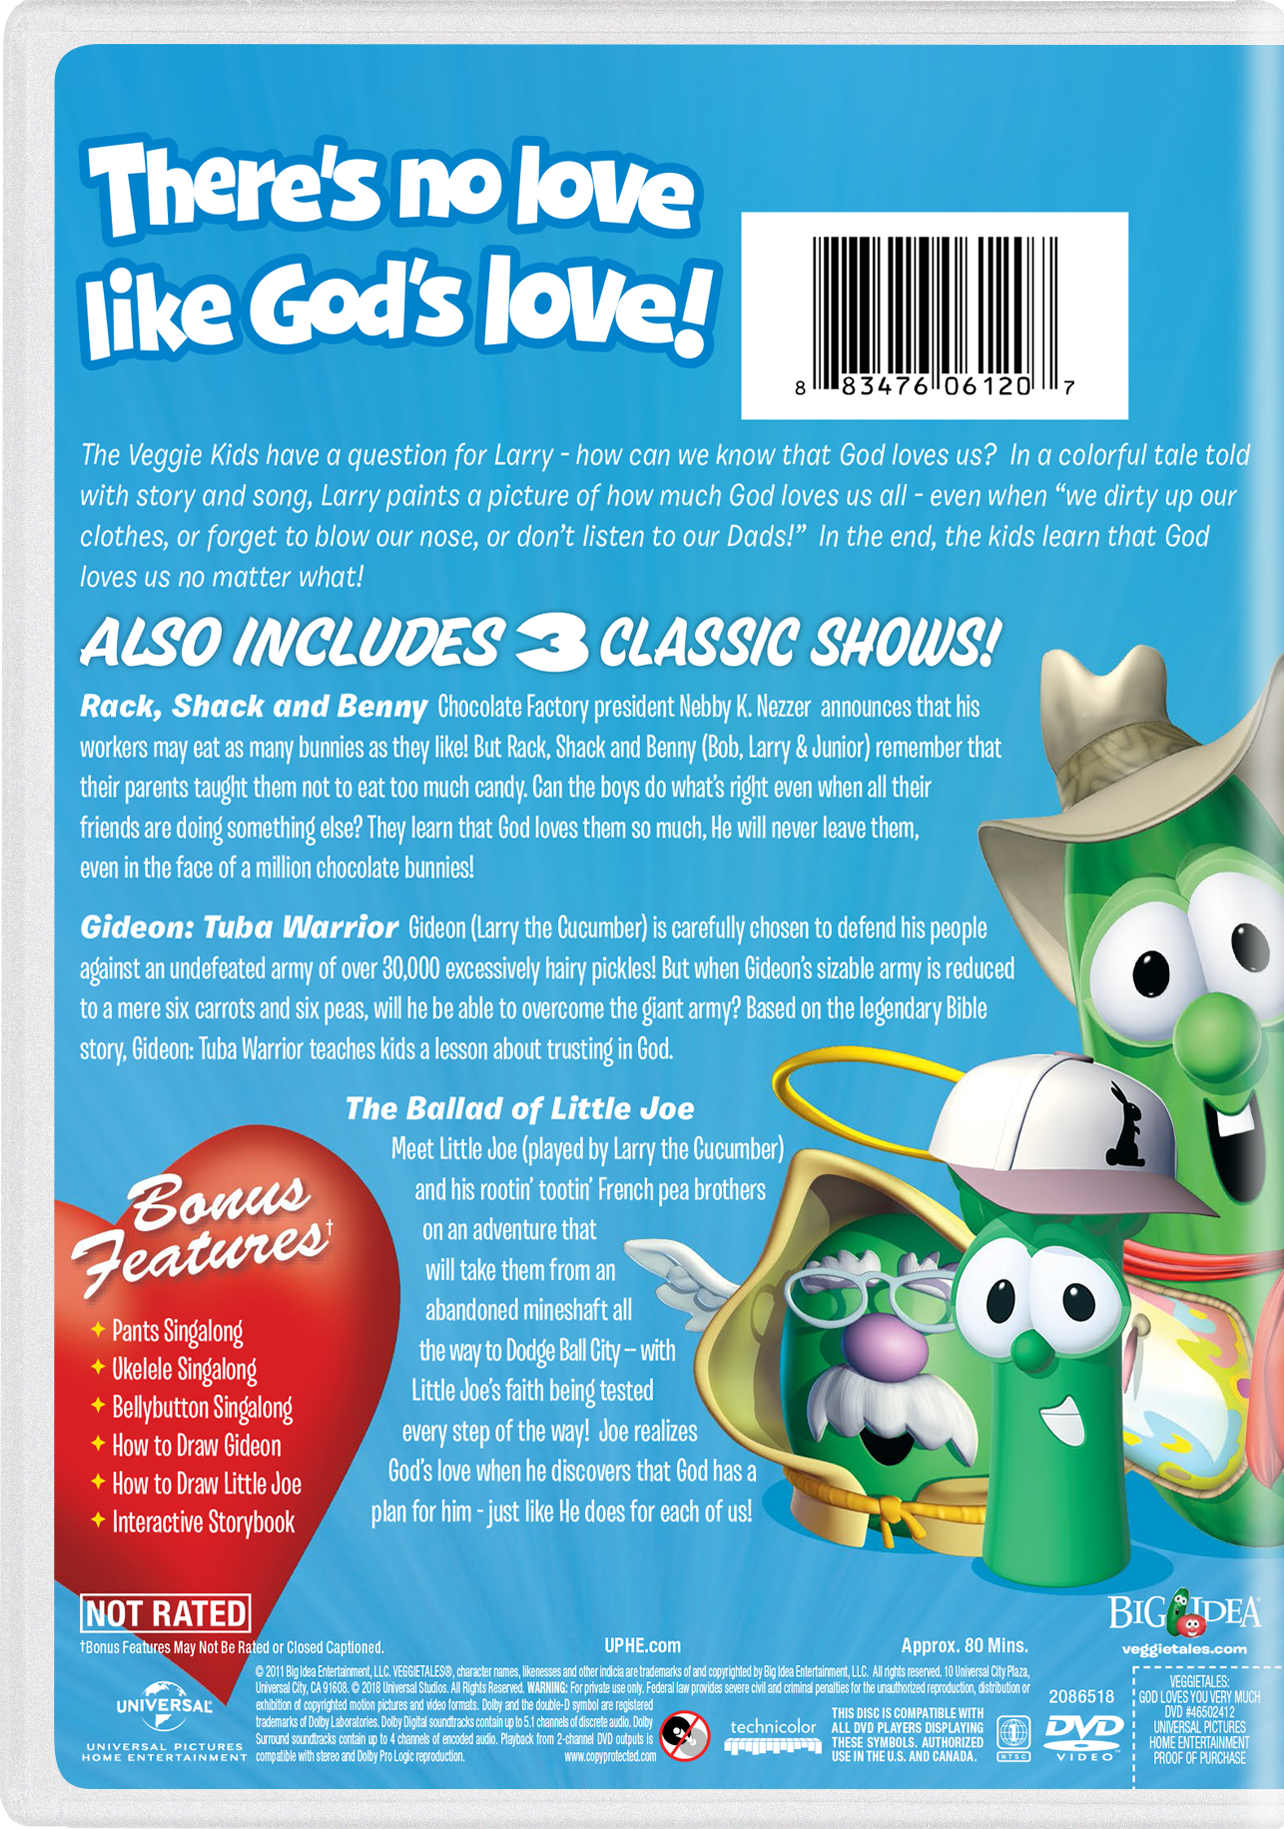 God Loves You Very Much (DVD), Big Idea, Animation - image 2 of 4